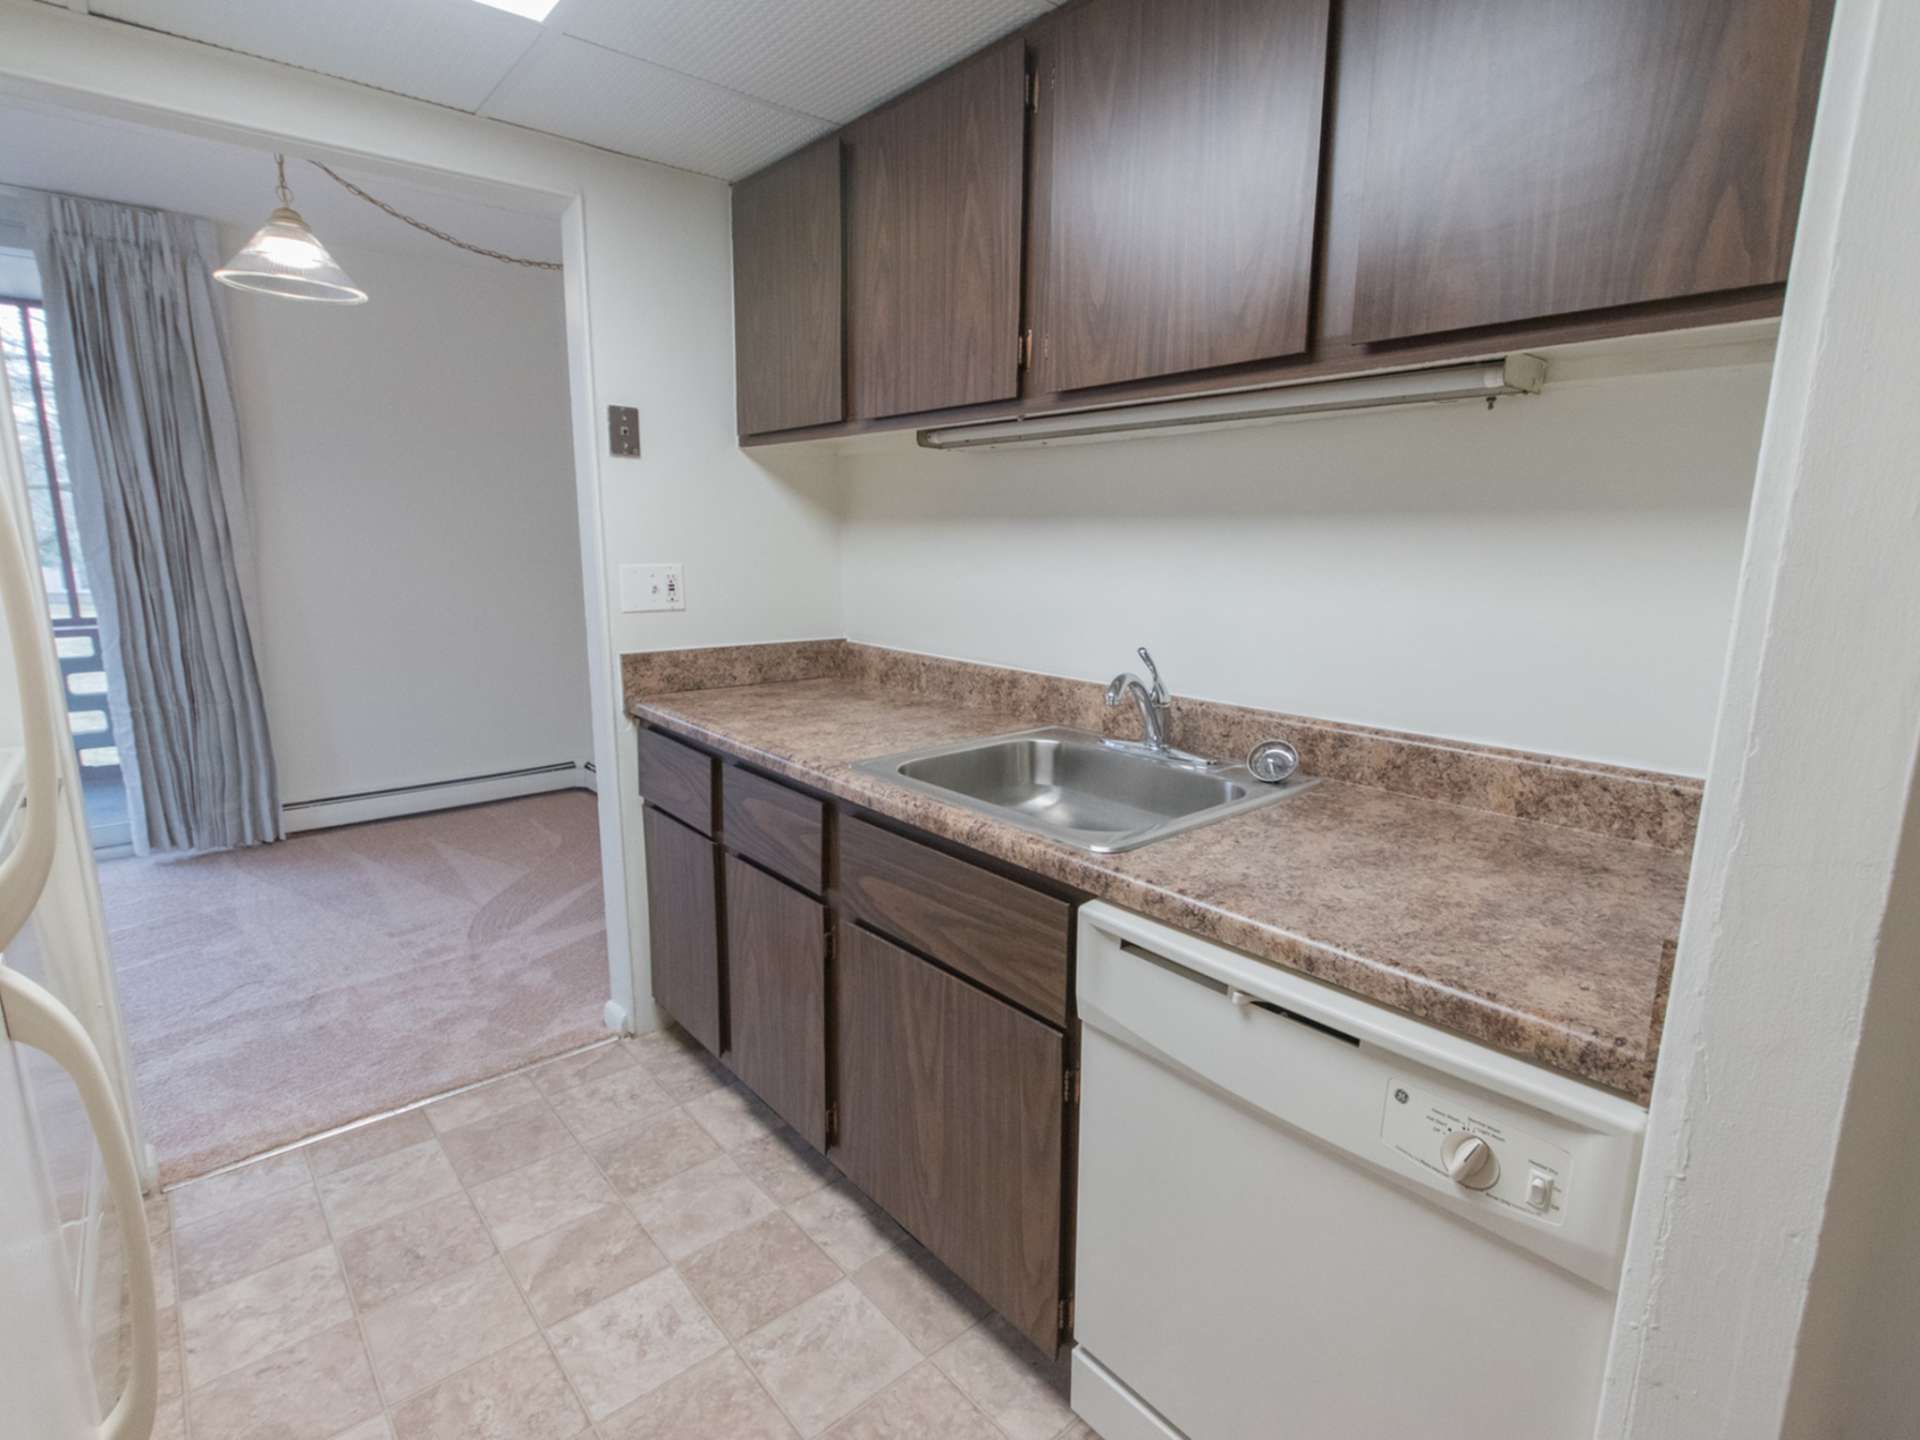 Kitchen area with white appliances and wooden cabinets at Lake Club Apartments.